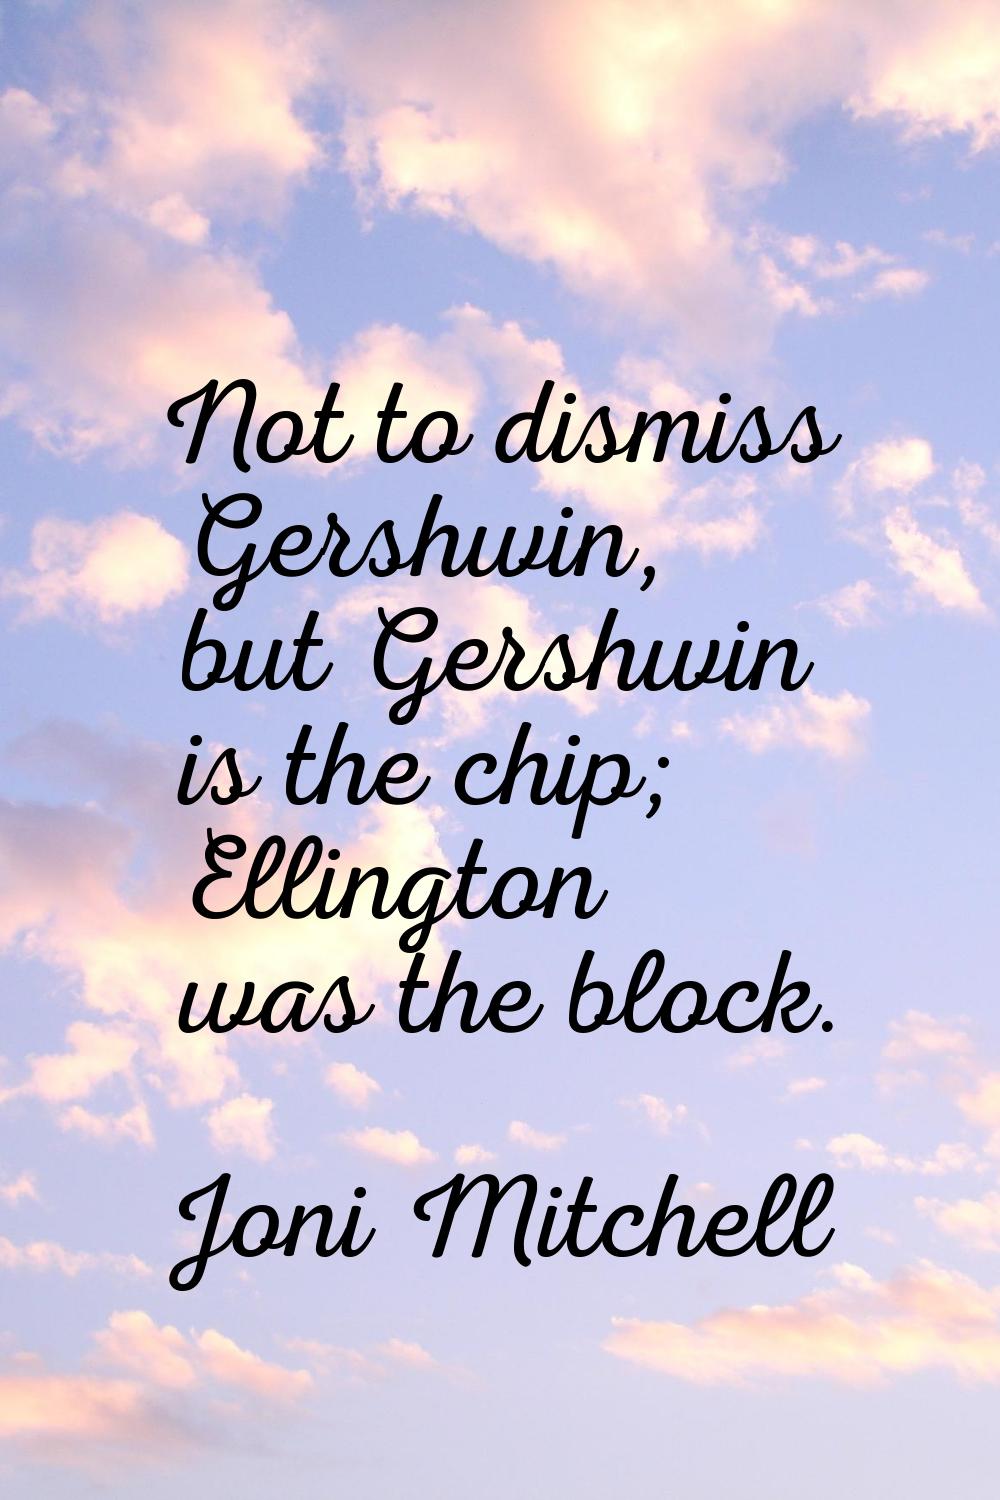 Not to dismiss Gershwin, but Gershwin is the chip; Ellington was the block.